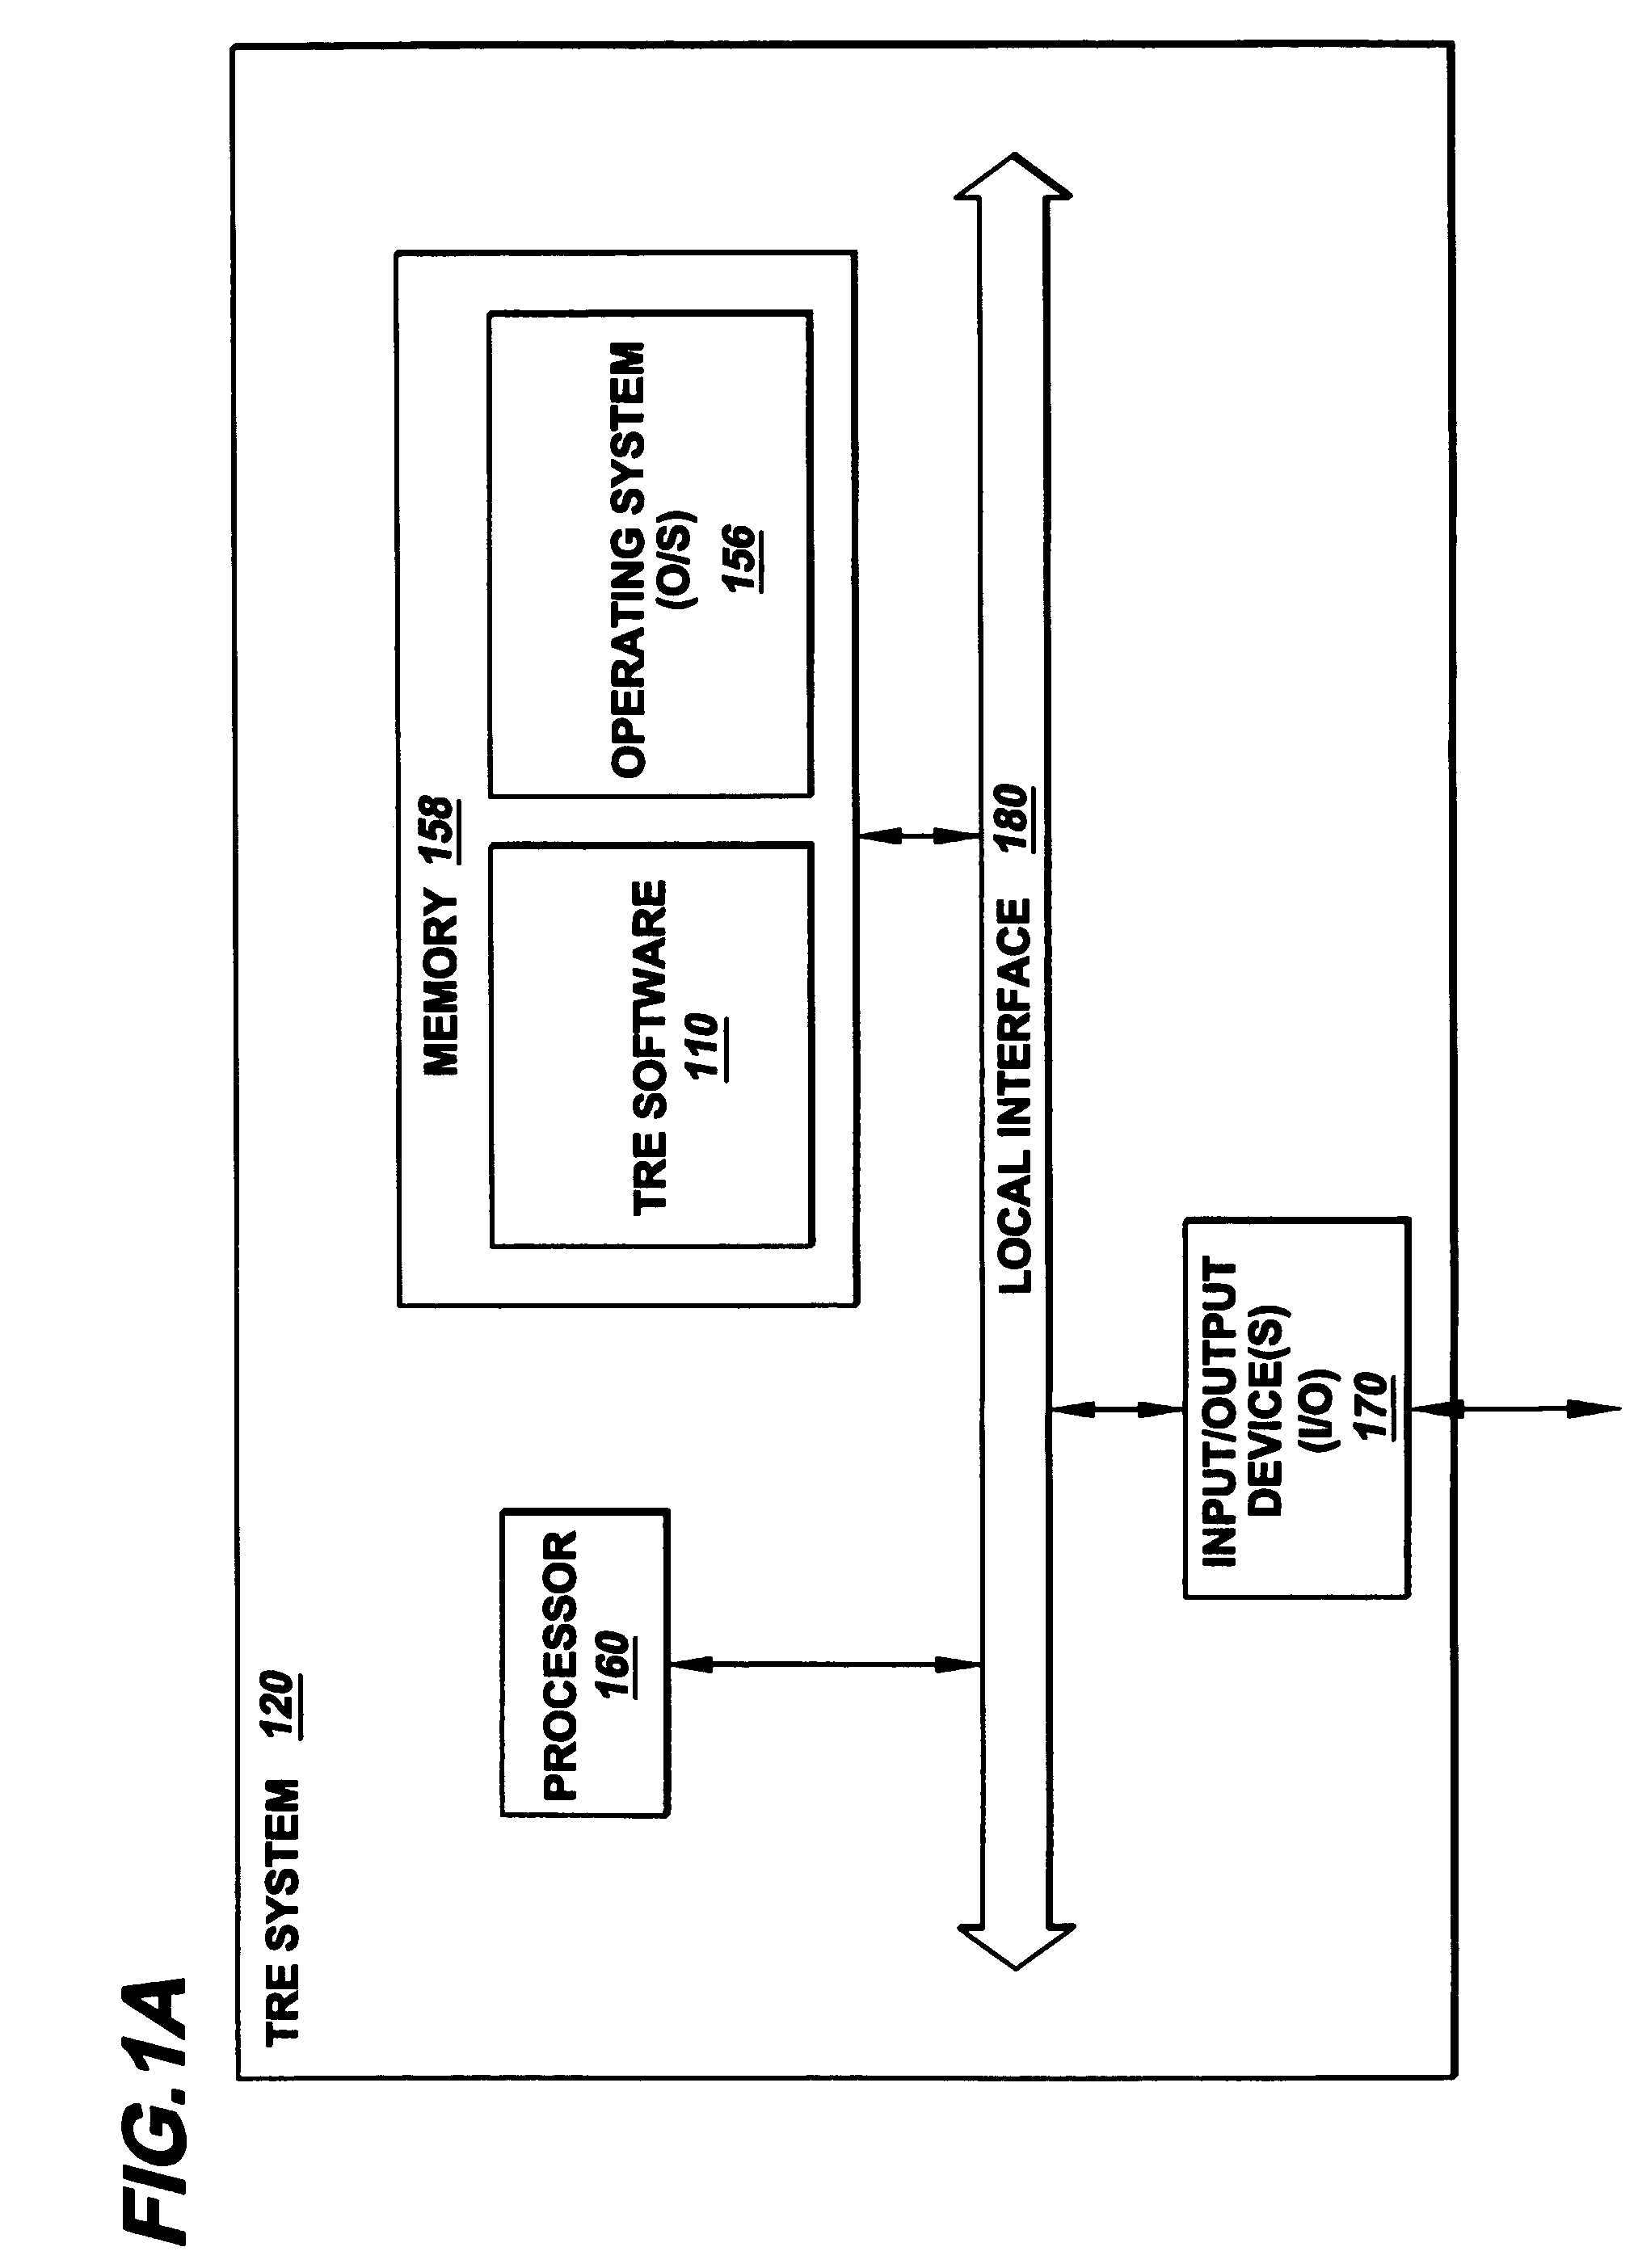 Systems and methods for estimating thermal resistance of field effect transistor structures